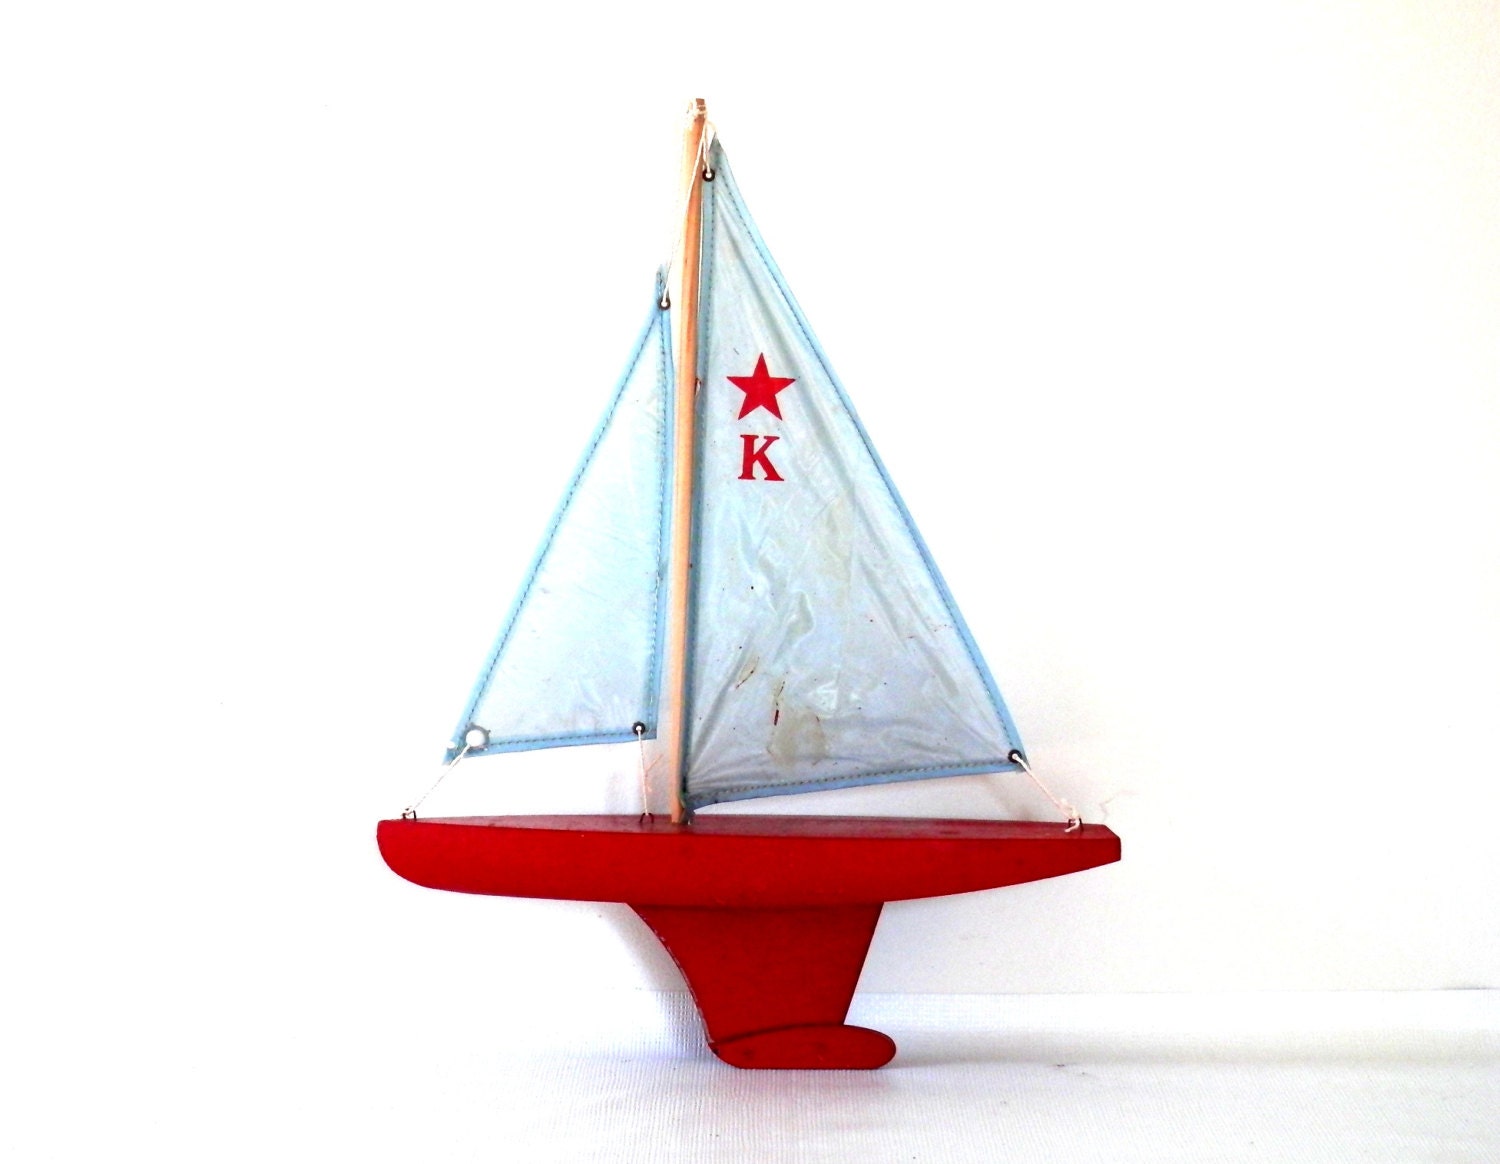 1940s Keystone Pond Boat Red Wooden Toy Sailboat